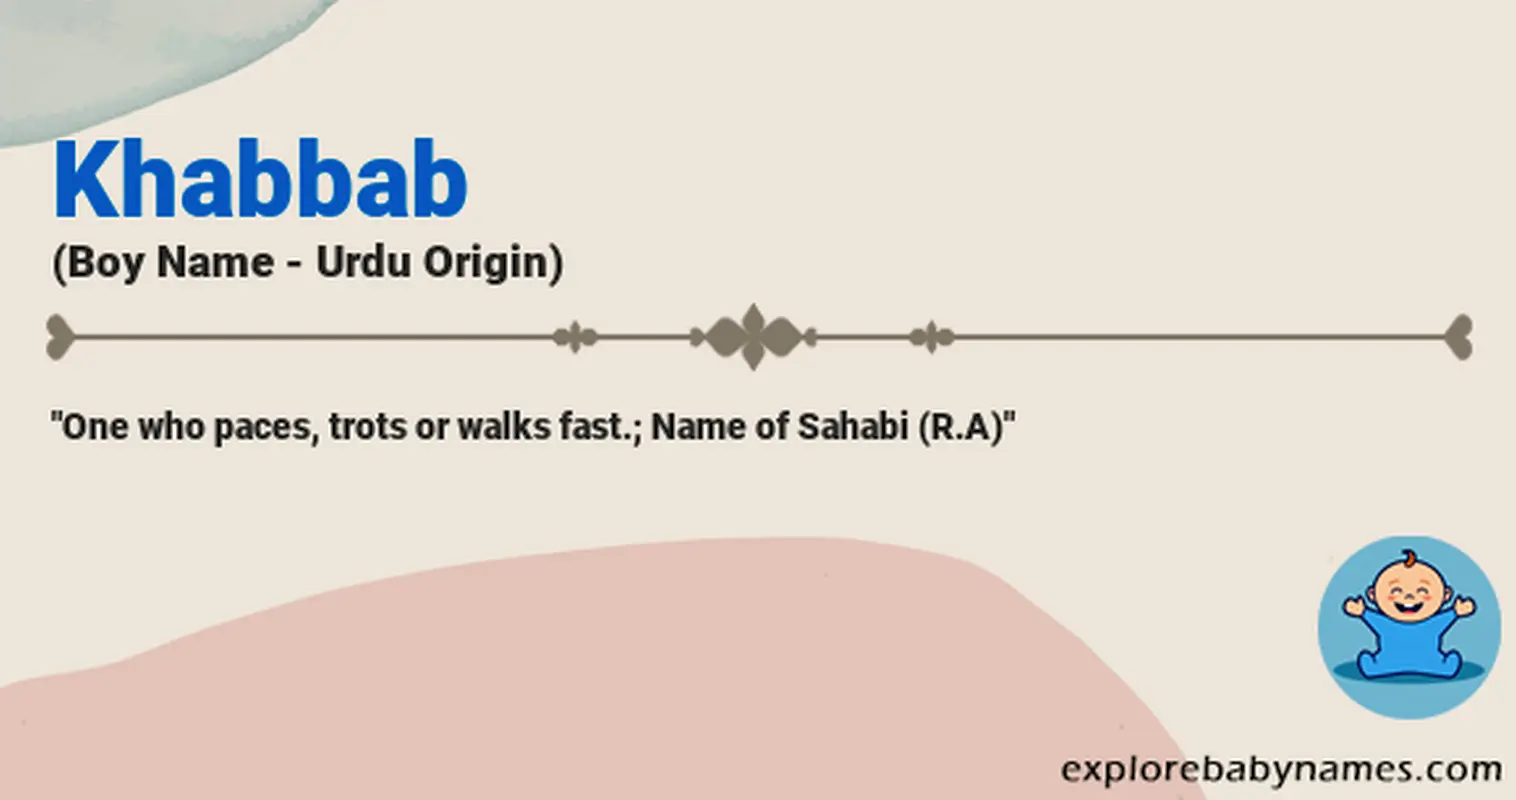 Meaning of Khabbab